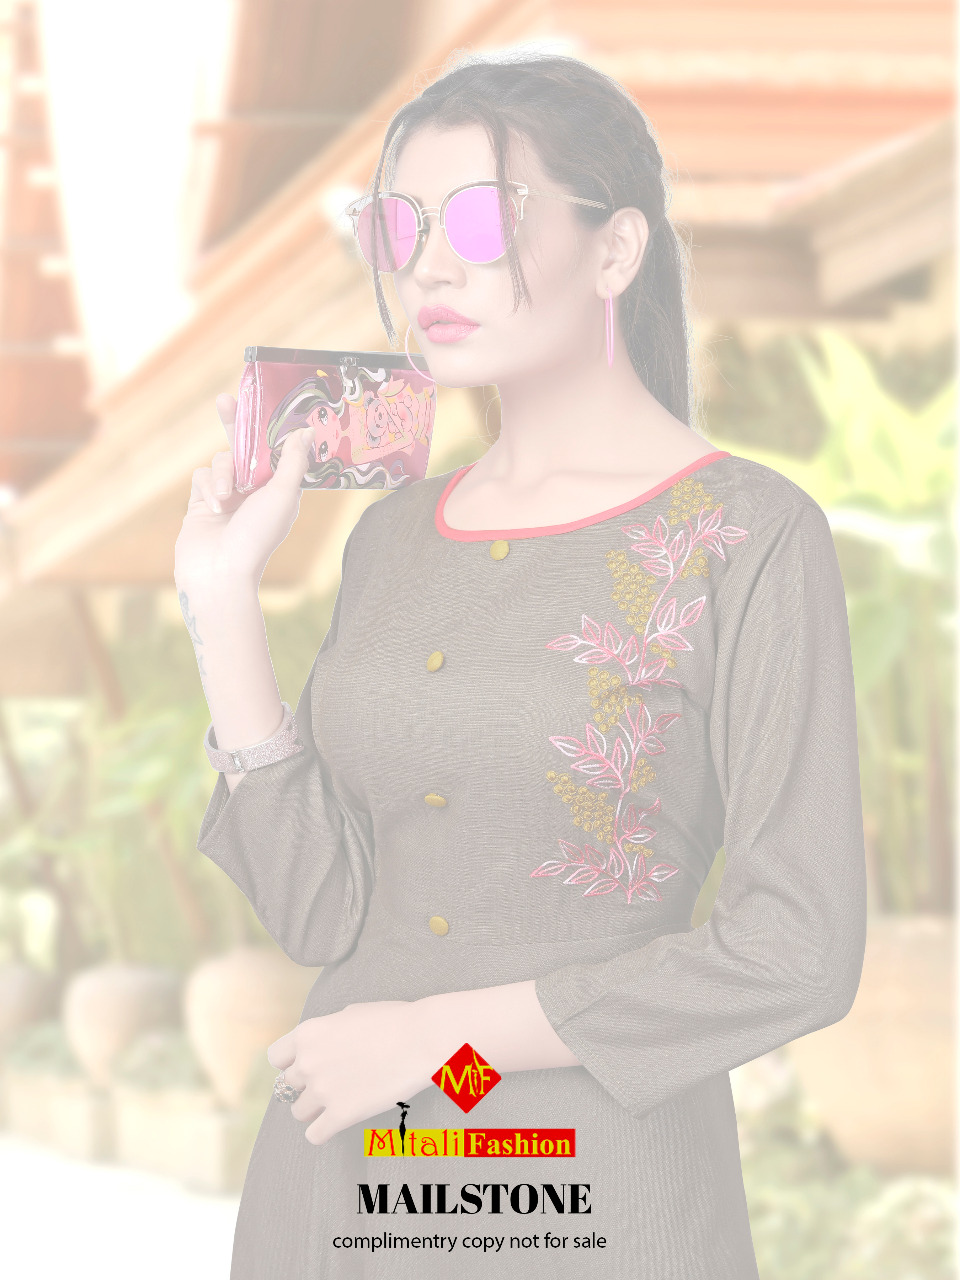 Mitali fashion presents mailstone casual fancy gown style kurtis collection